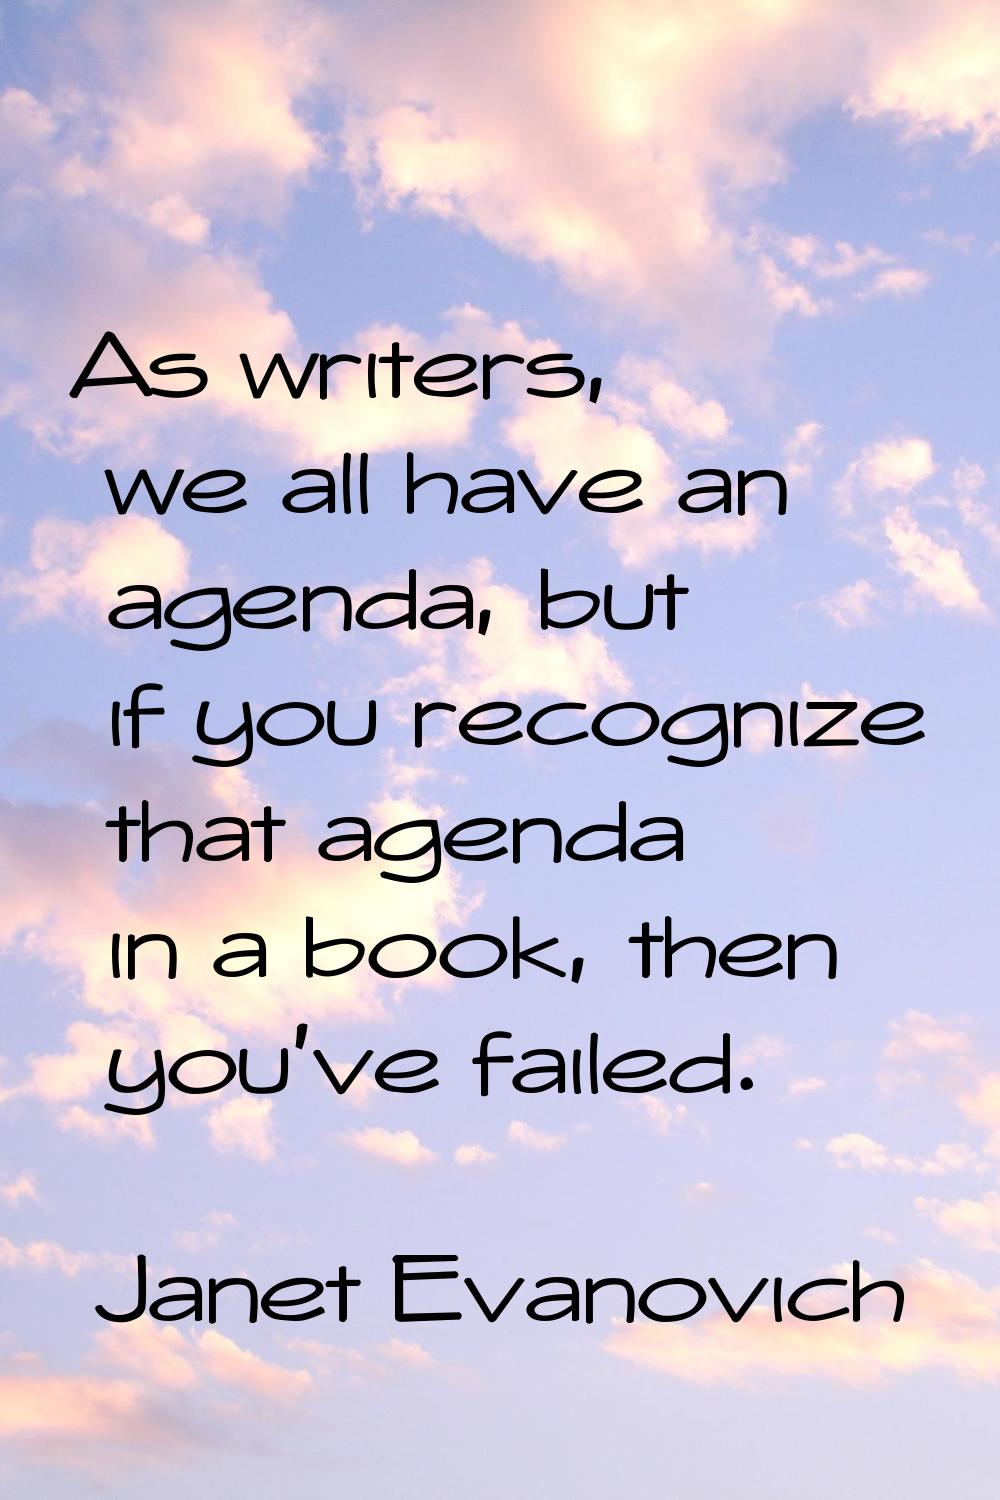 As writers, we all have an agenda, but if you recognize that agenda in a book, then you've failed.